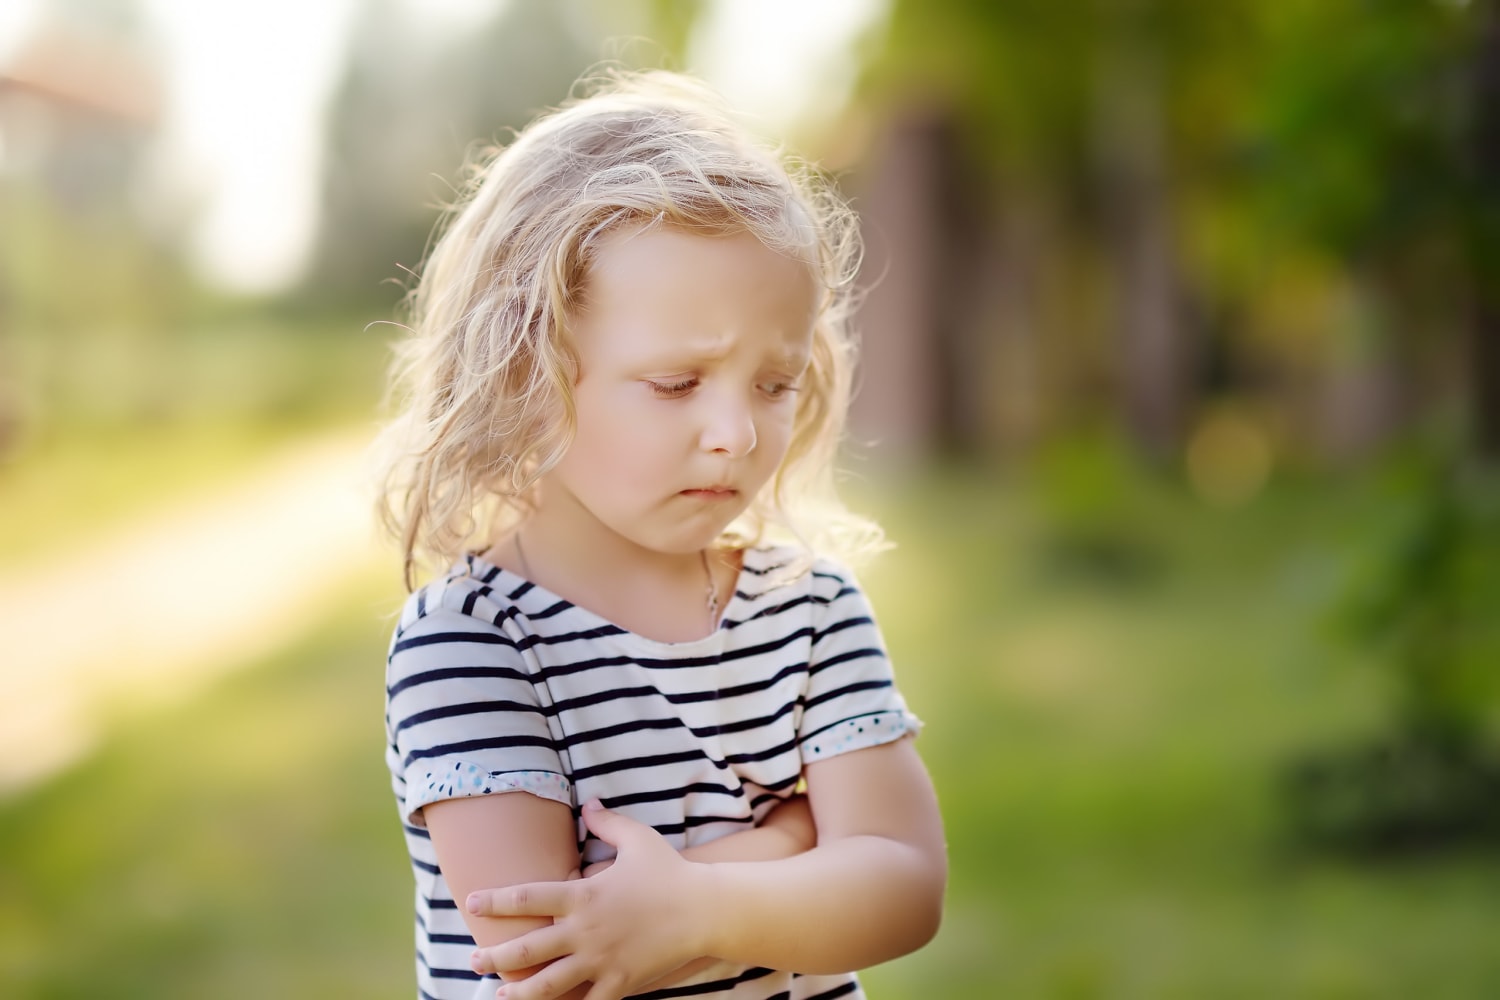 Dealing With Childhood Trauma: This Is How You Can Help Your Child